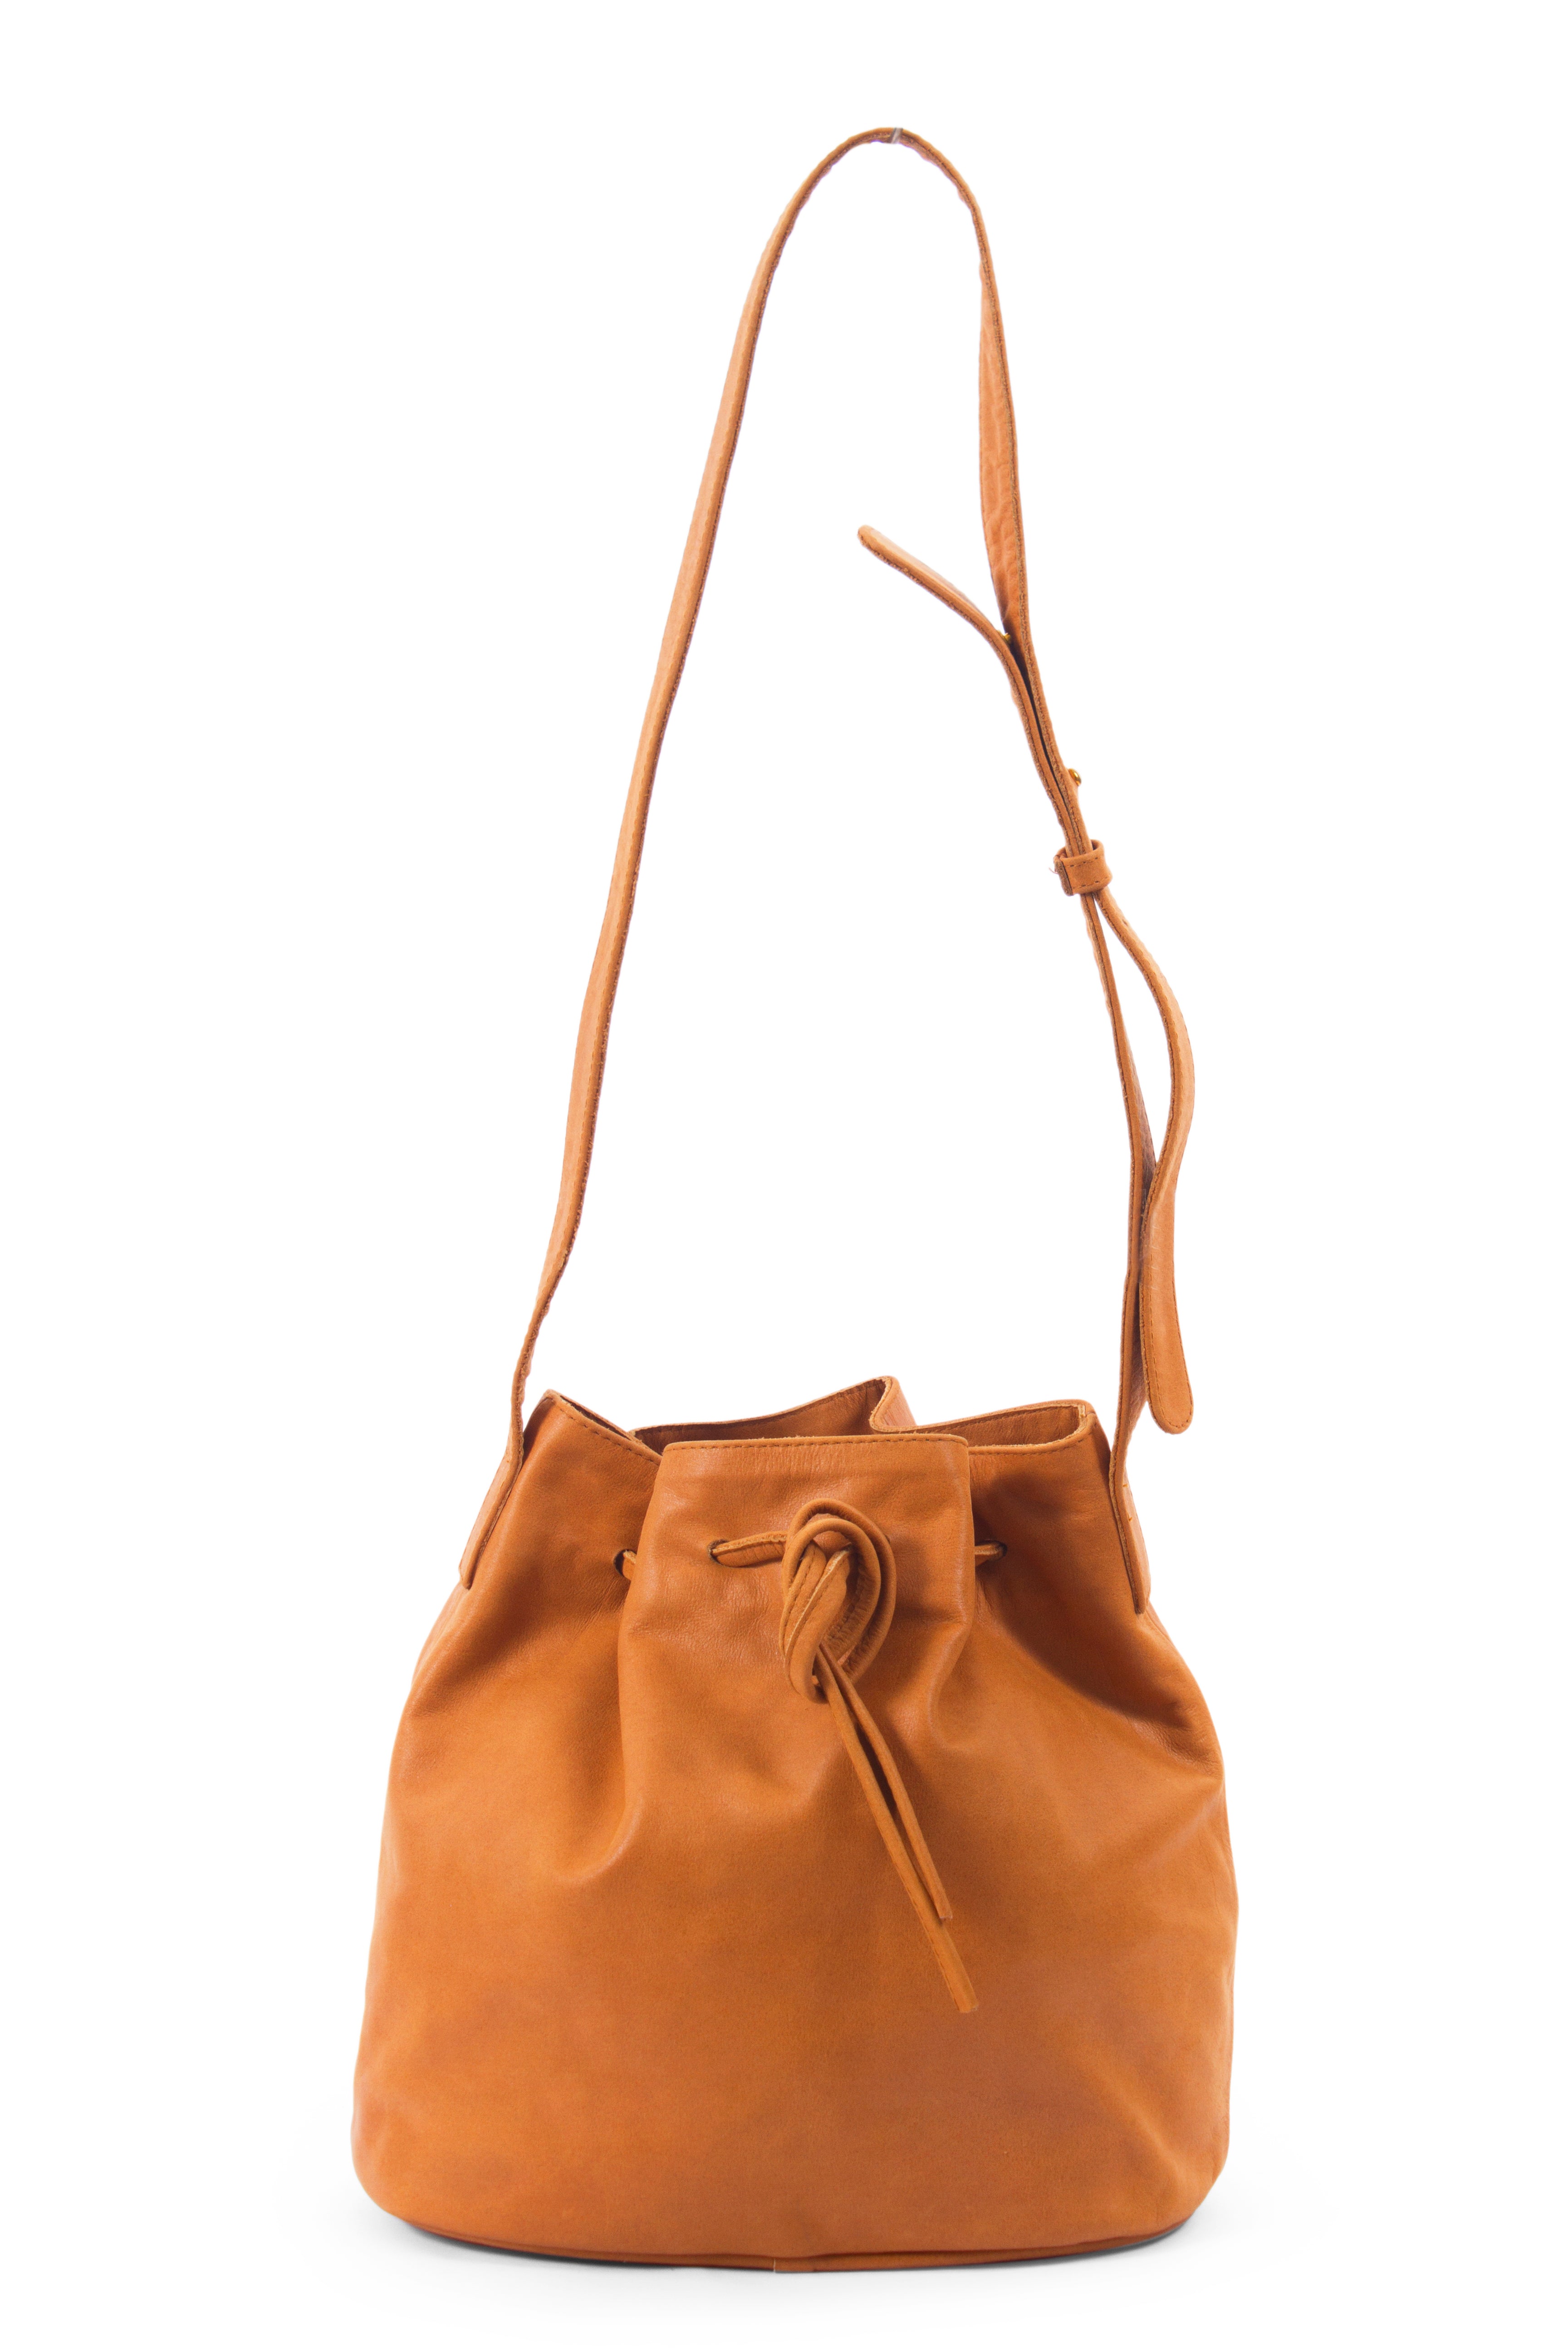 Lacy Bag-Large Genuine Leather Bucket Bag